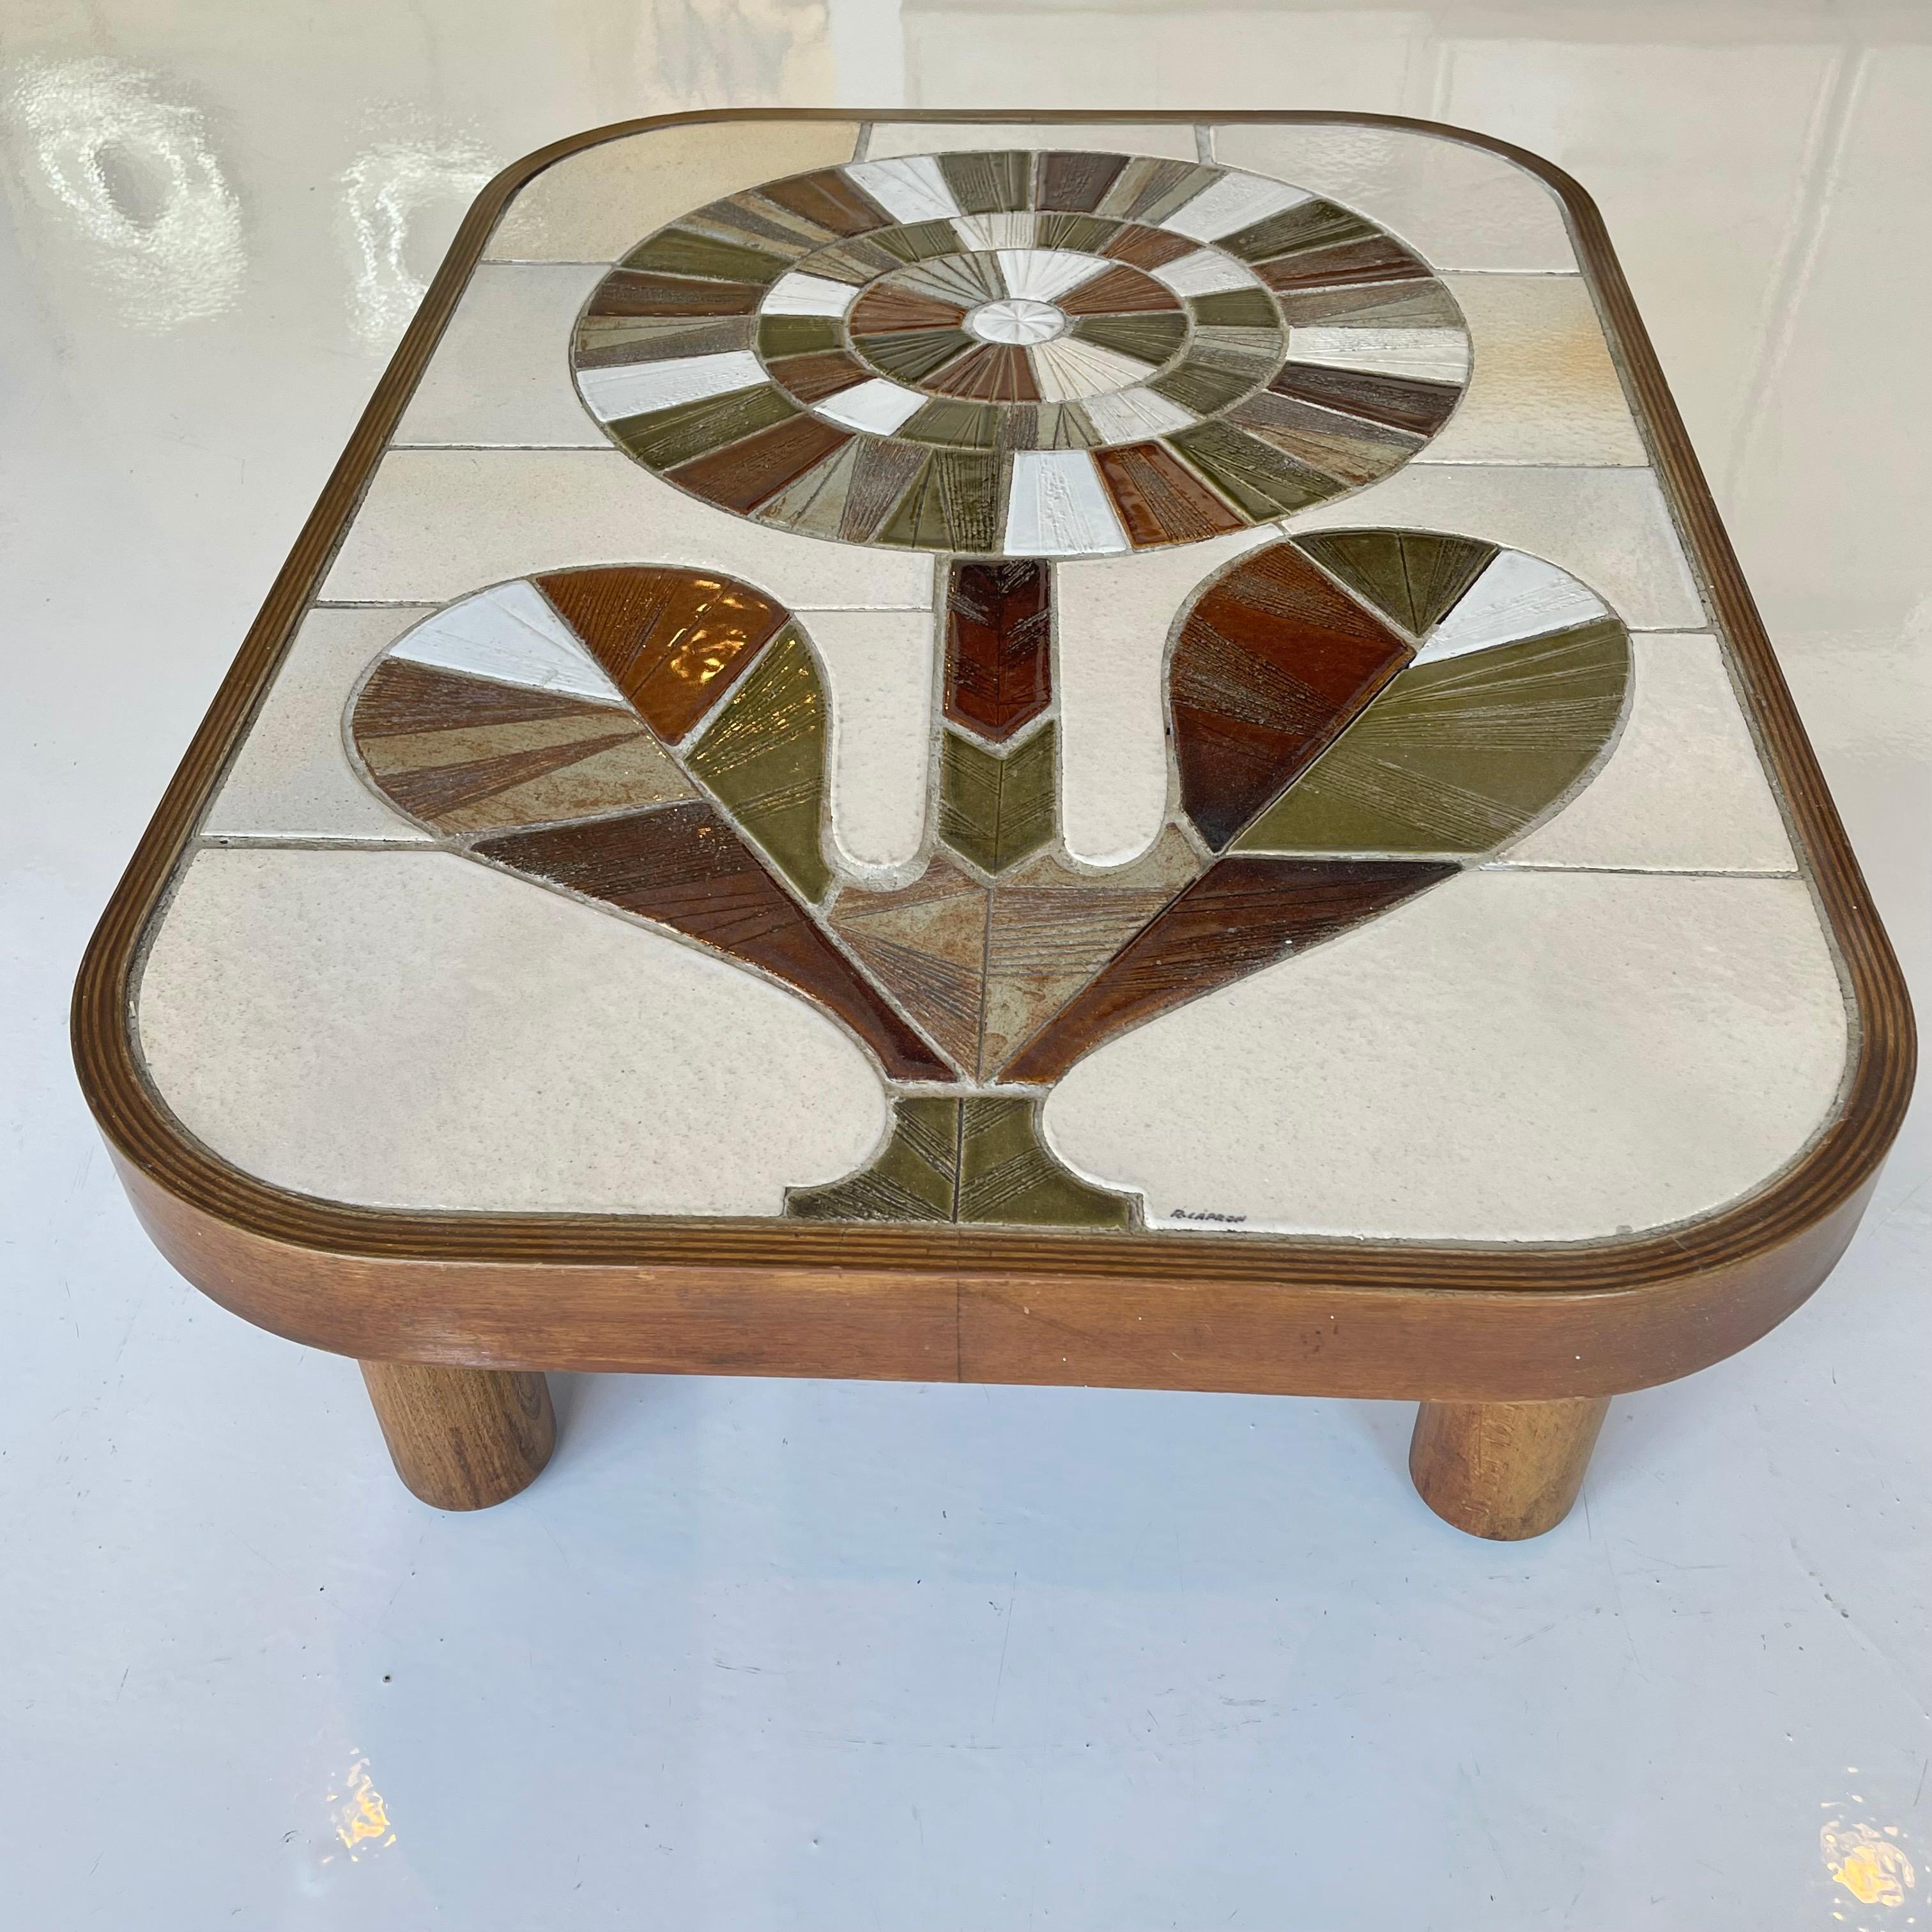 Beautiful ceramic coffee table signed by Roger Capron. Tiles of an array of different shapes, colors and textures come together on this coffee table to create a stunning mosaic table top. Fantastic rectangular shape on cylindrical Mahogany wood legs.